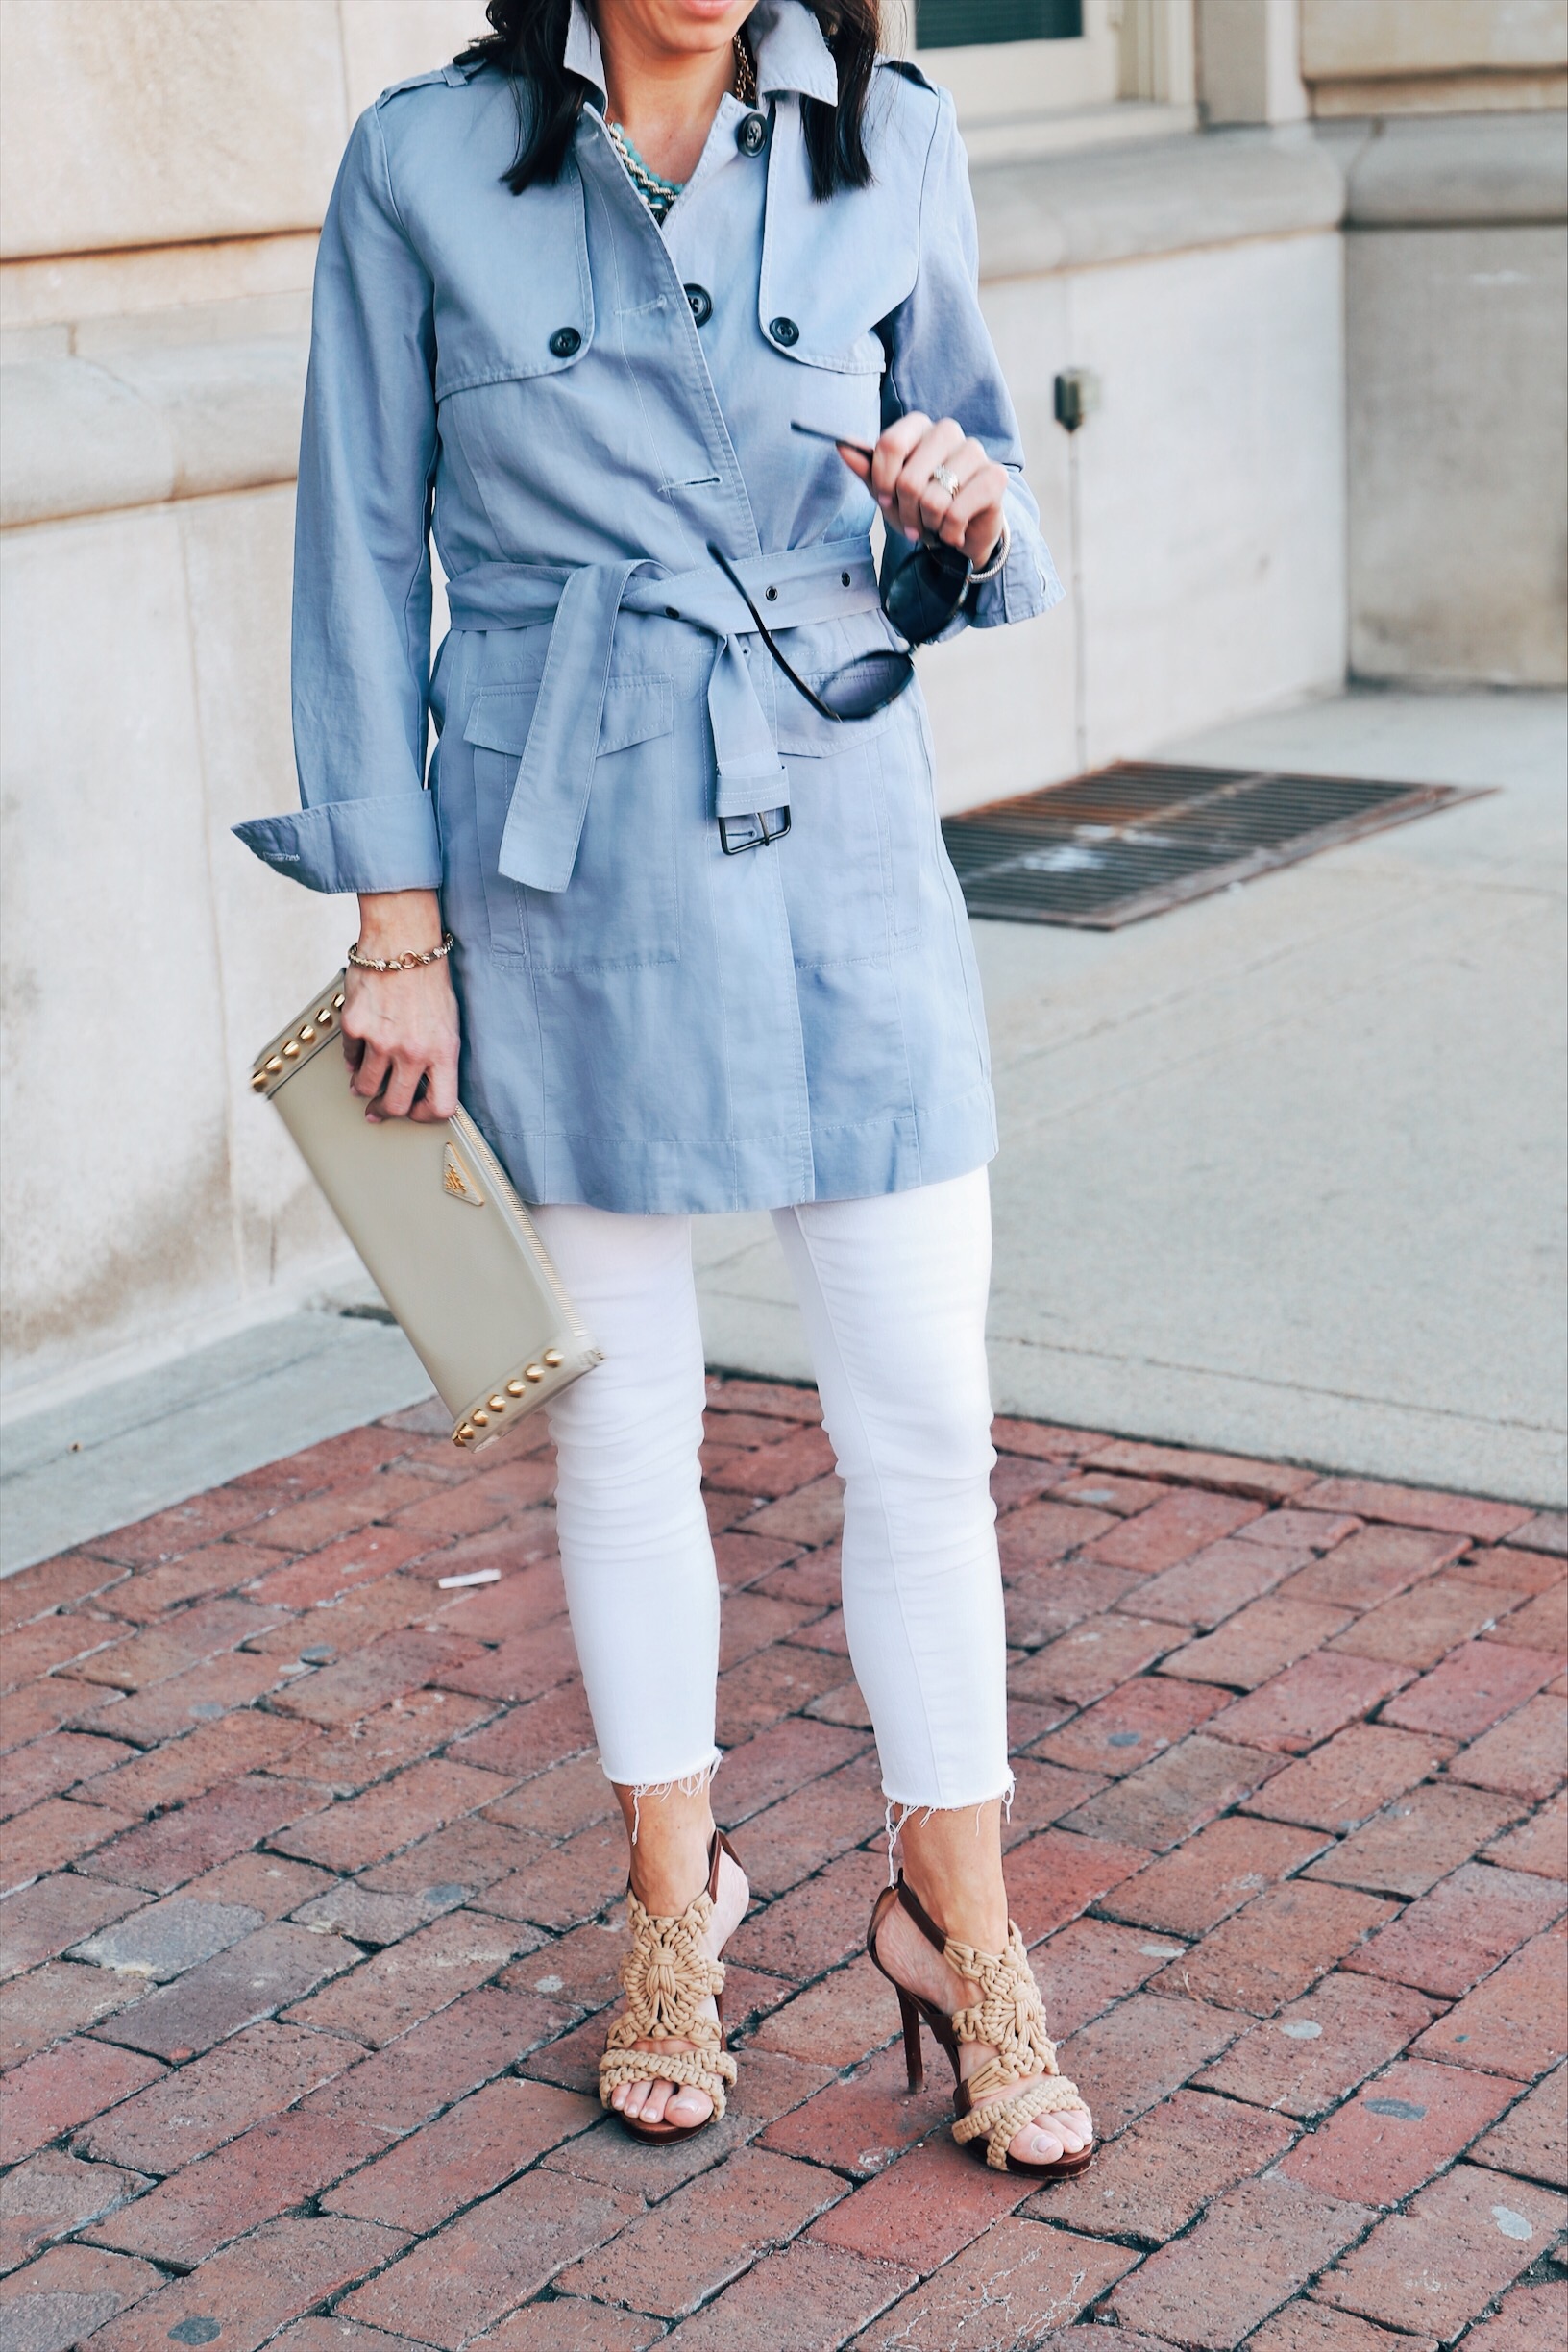 Ruffle Trim Top + Trench + White Jeans // www.tinystampede.com